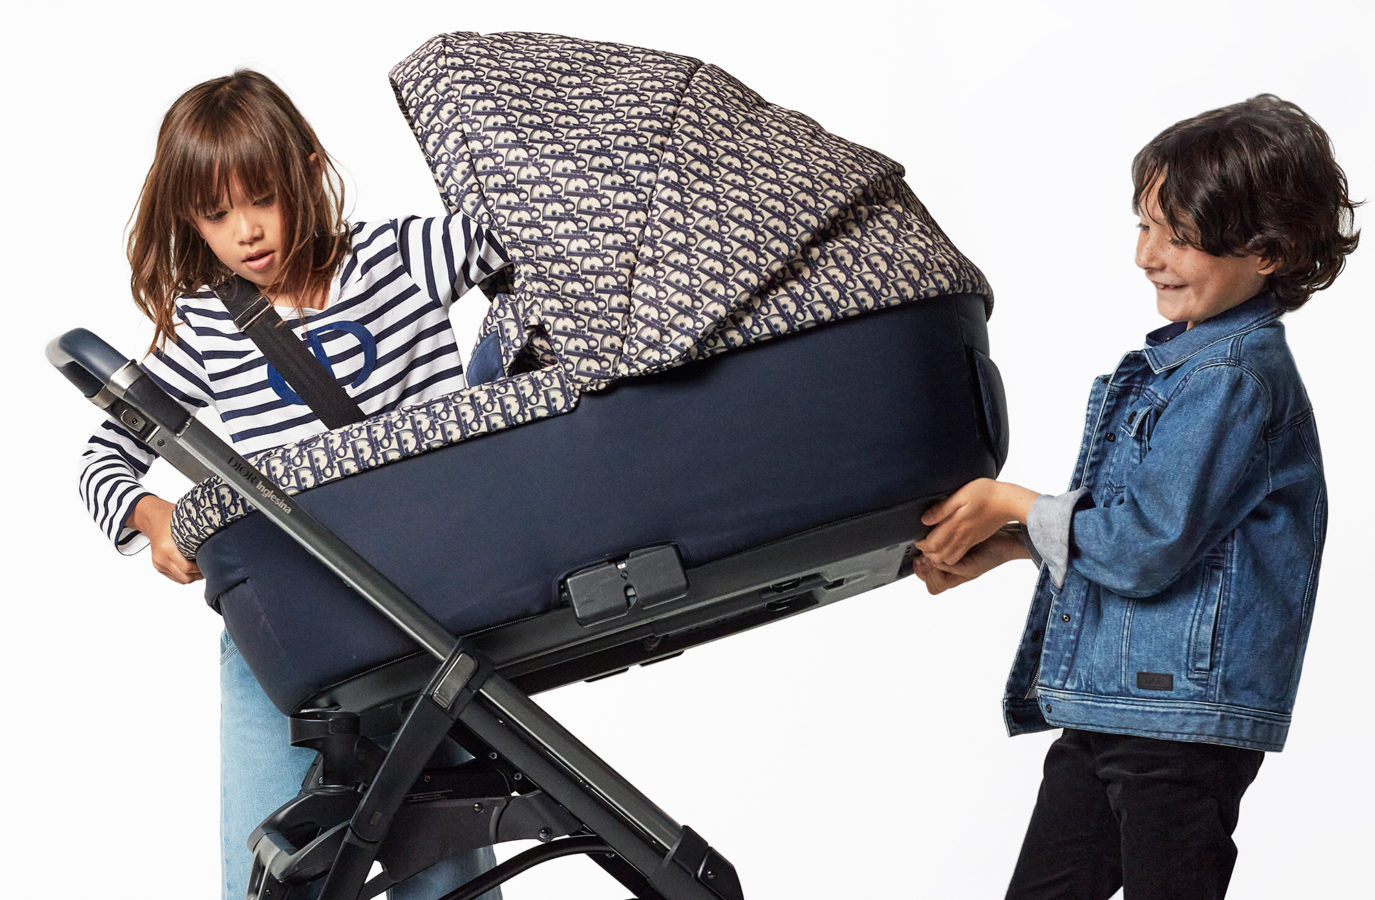 Dior Presents its First Stroller in Collaboration with Inglesina